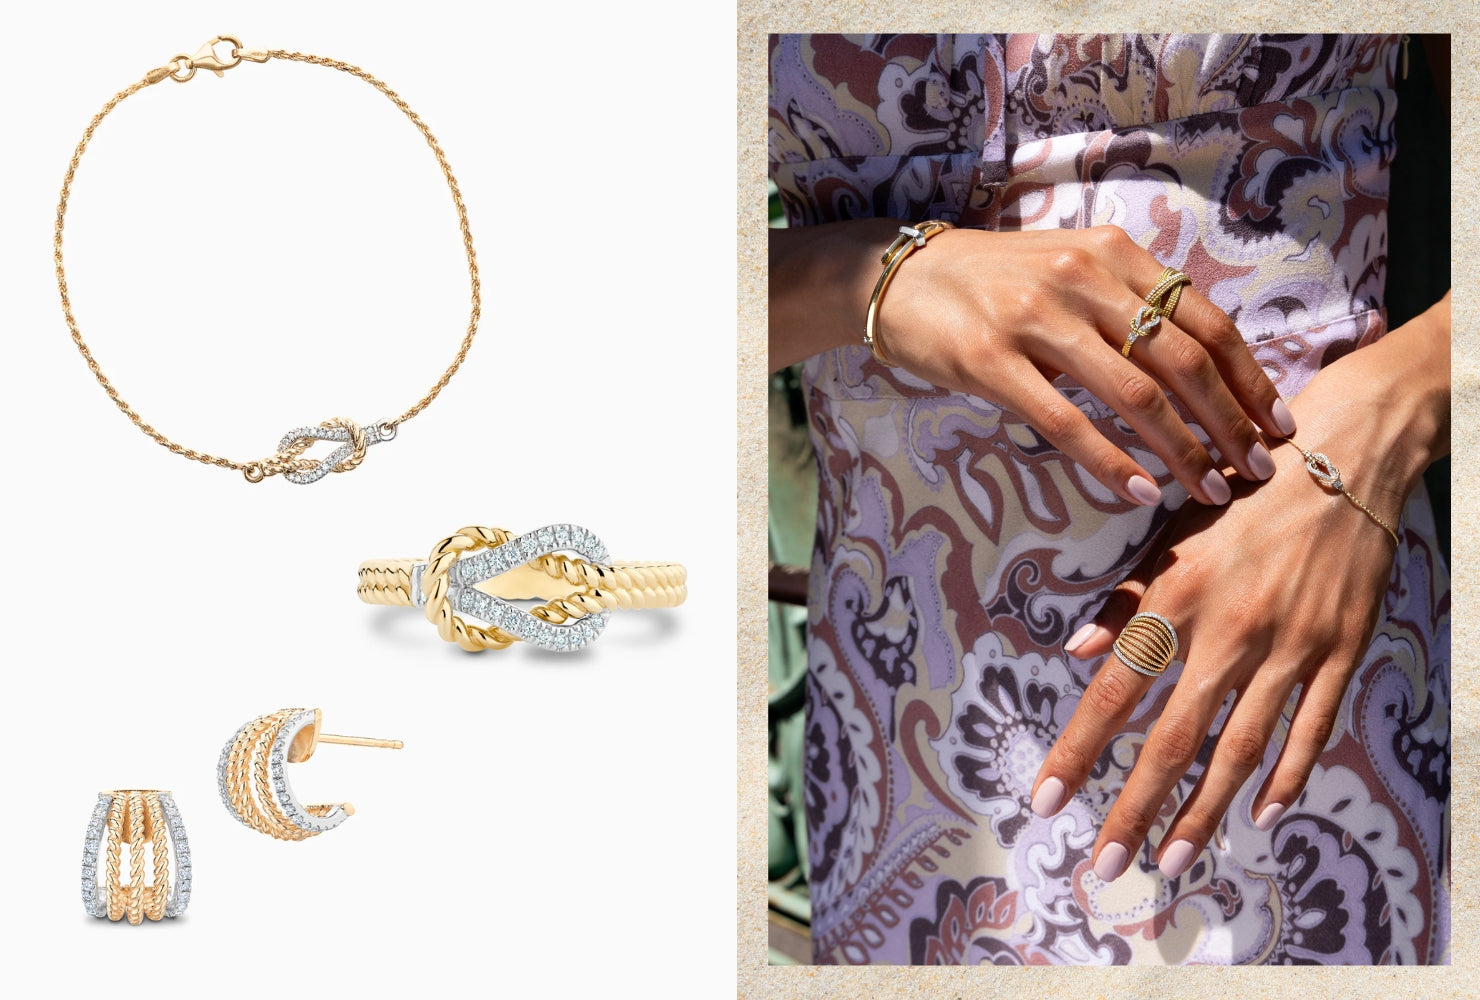 Model wearing Tresses rings and a bracelet next to three images of other pieces of jewelry from the Tresses Collection